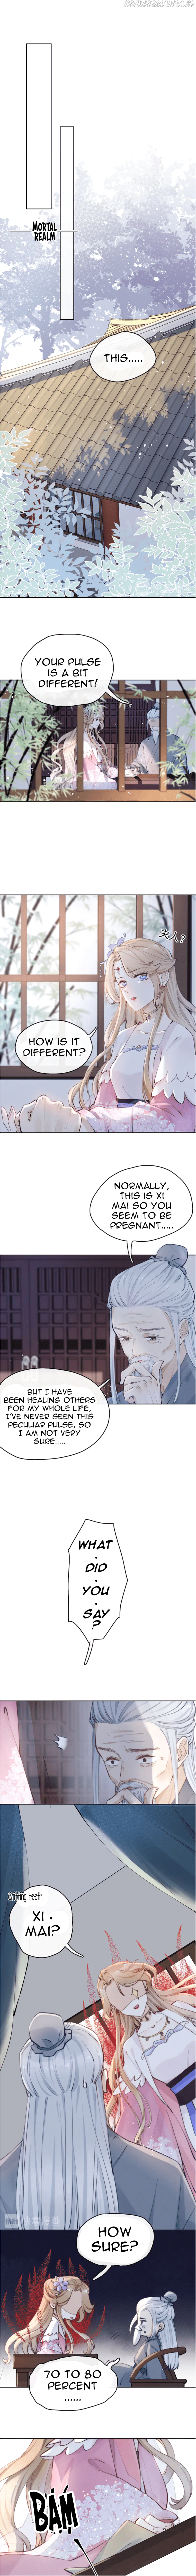 This Celestial Is Pregnant - Page 4